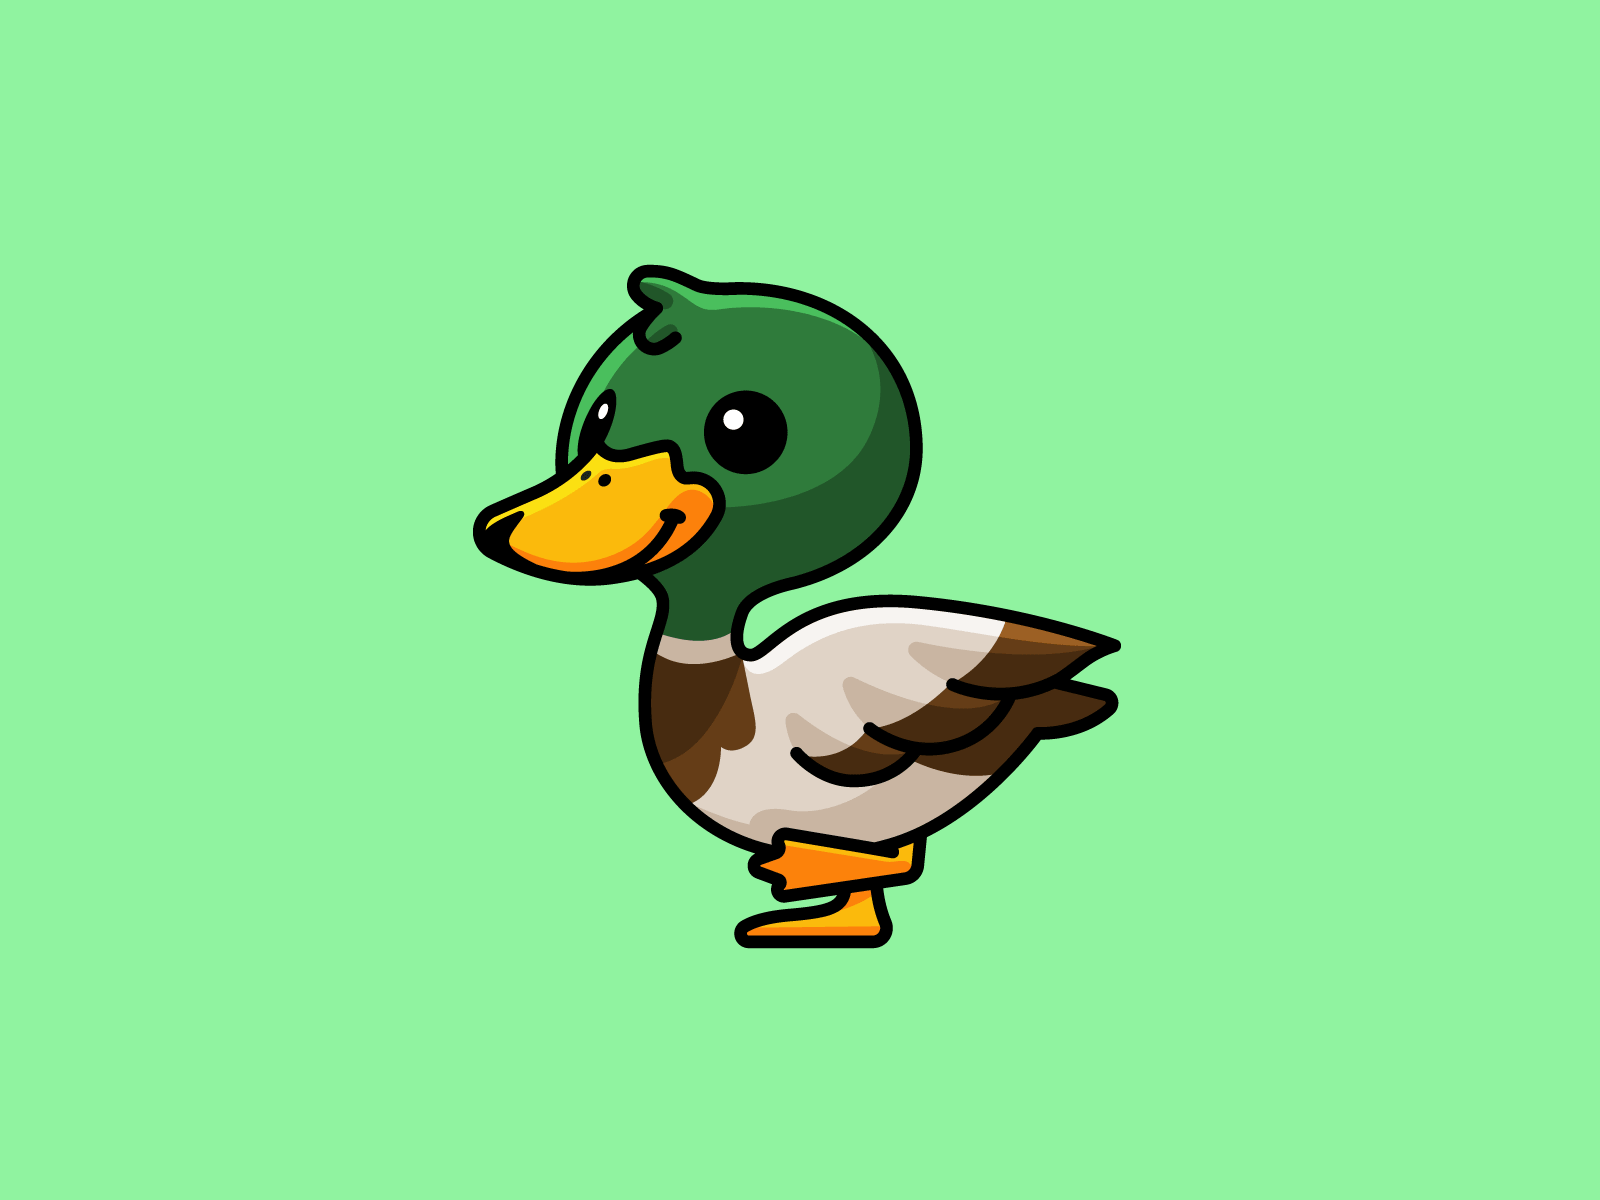 Cute Duck by dipo graphic on Dribbble